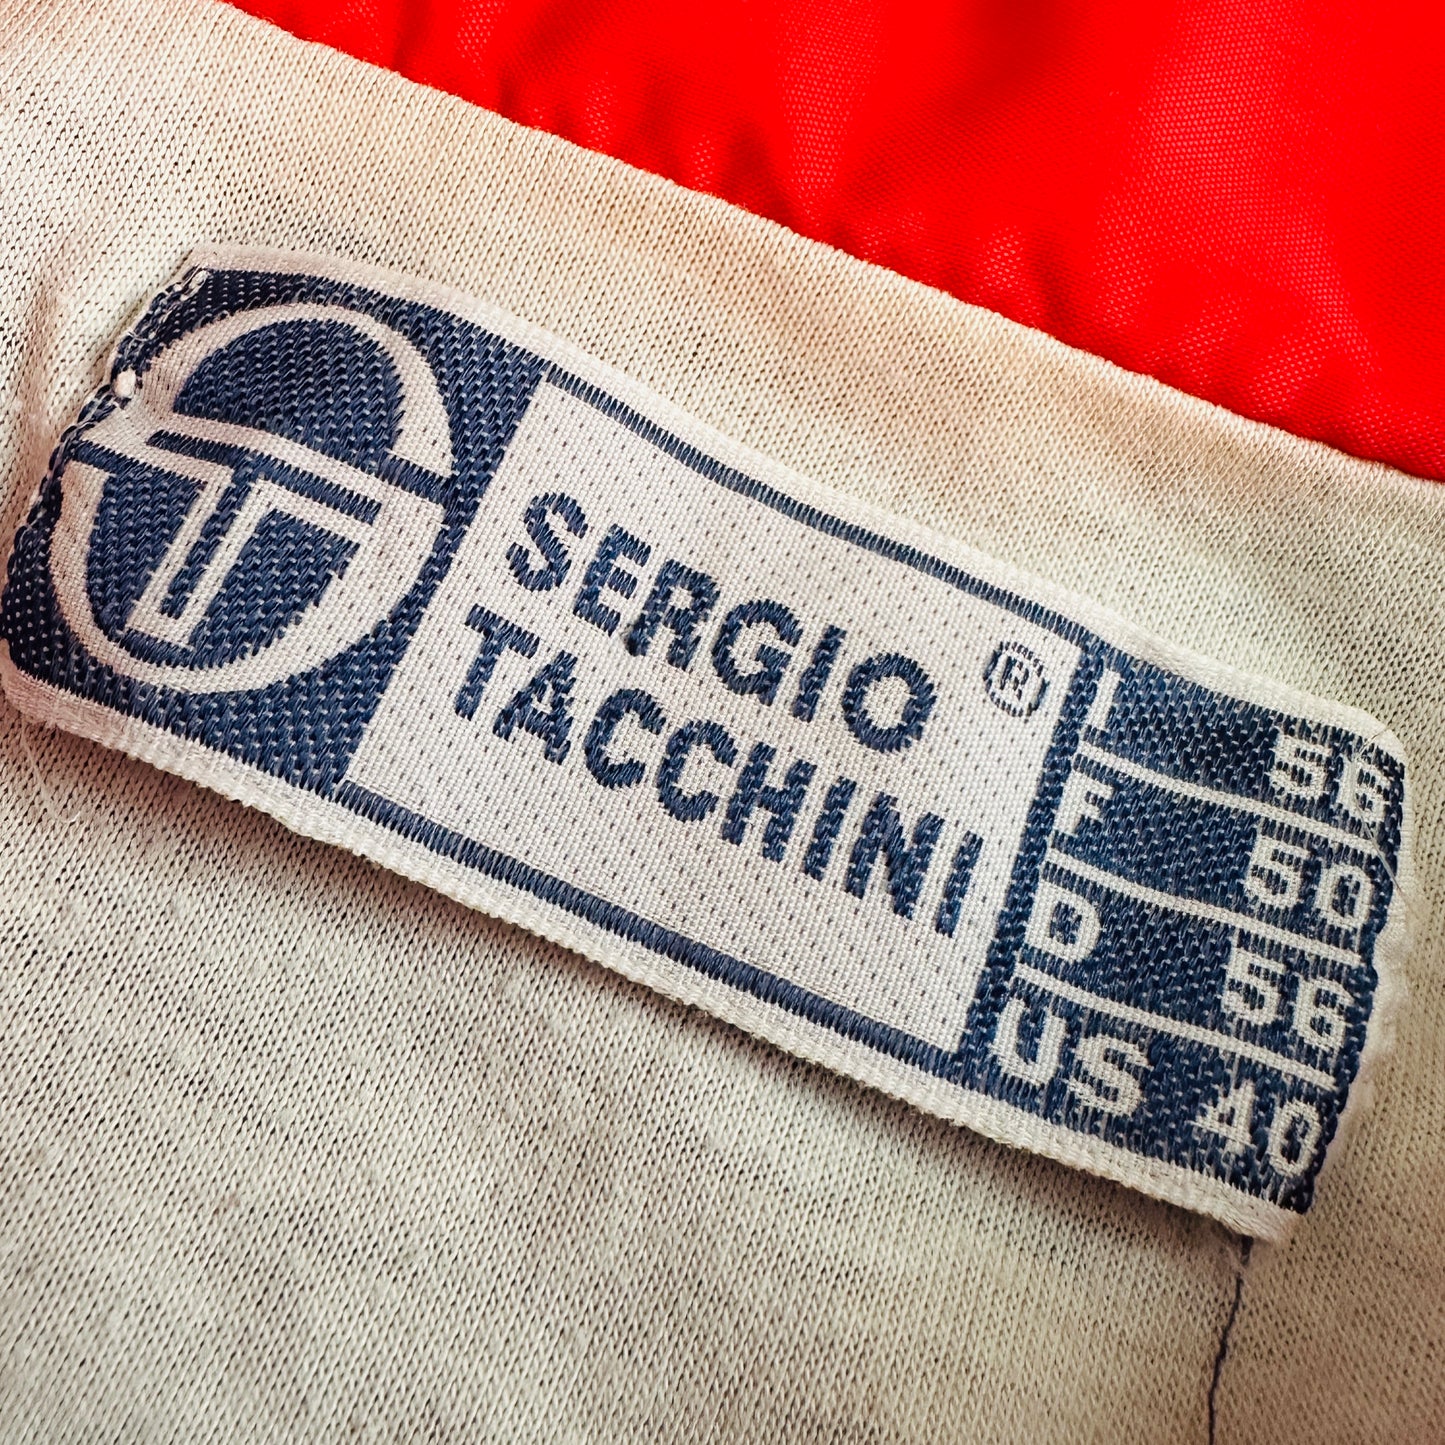 Sergio Tacchini Vintage 80s Track Jacket - 56 / XXL - Made in Italy